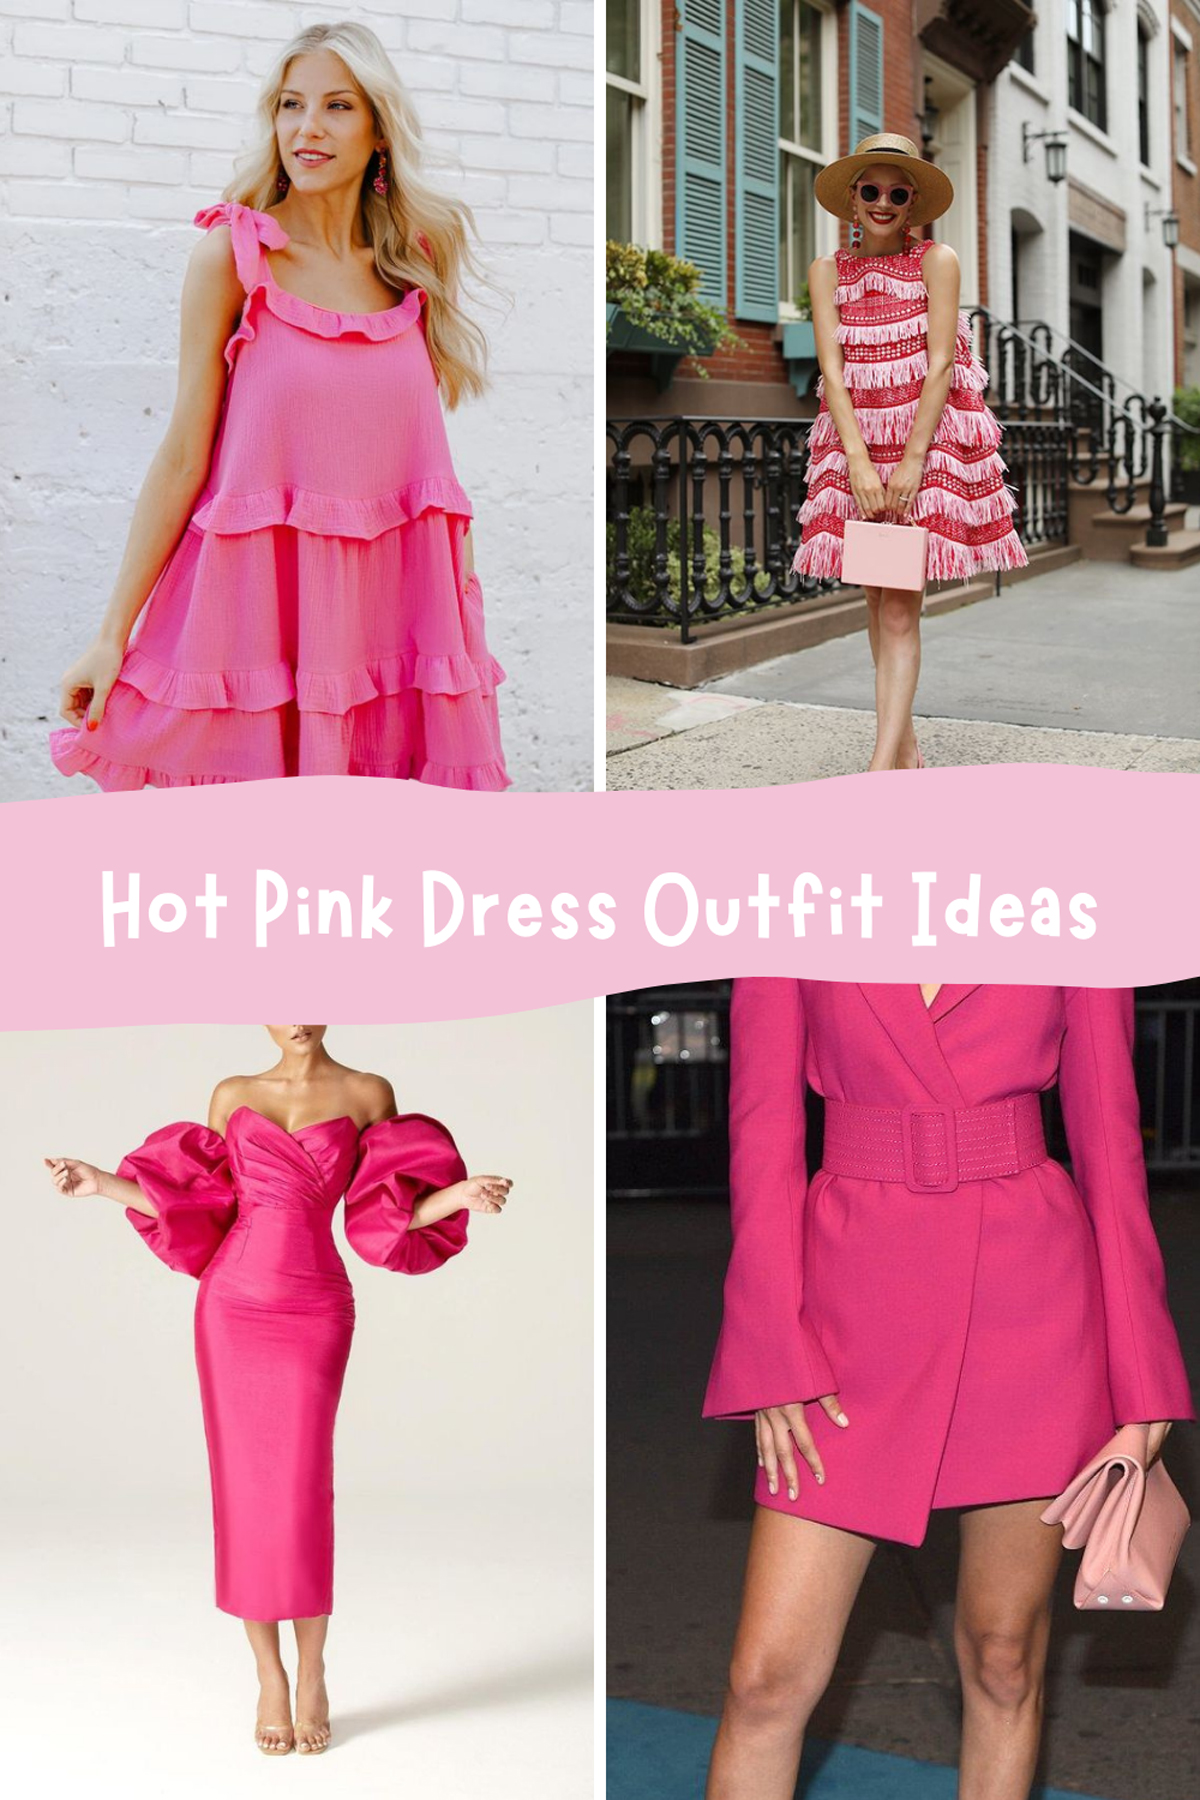 Hot Pink Dress Outfit Ideas